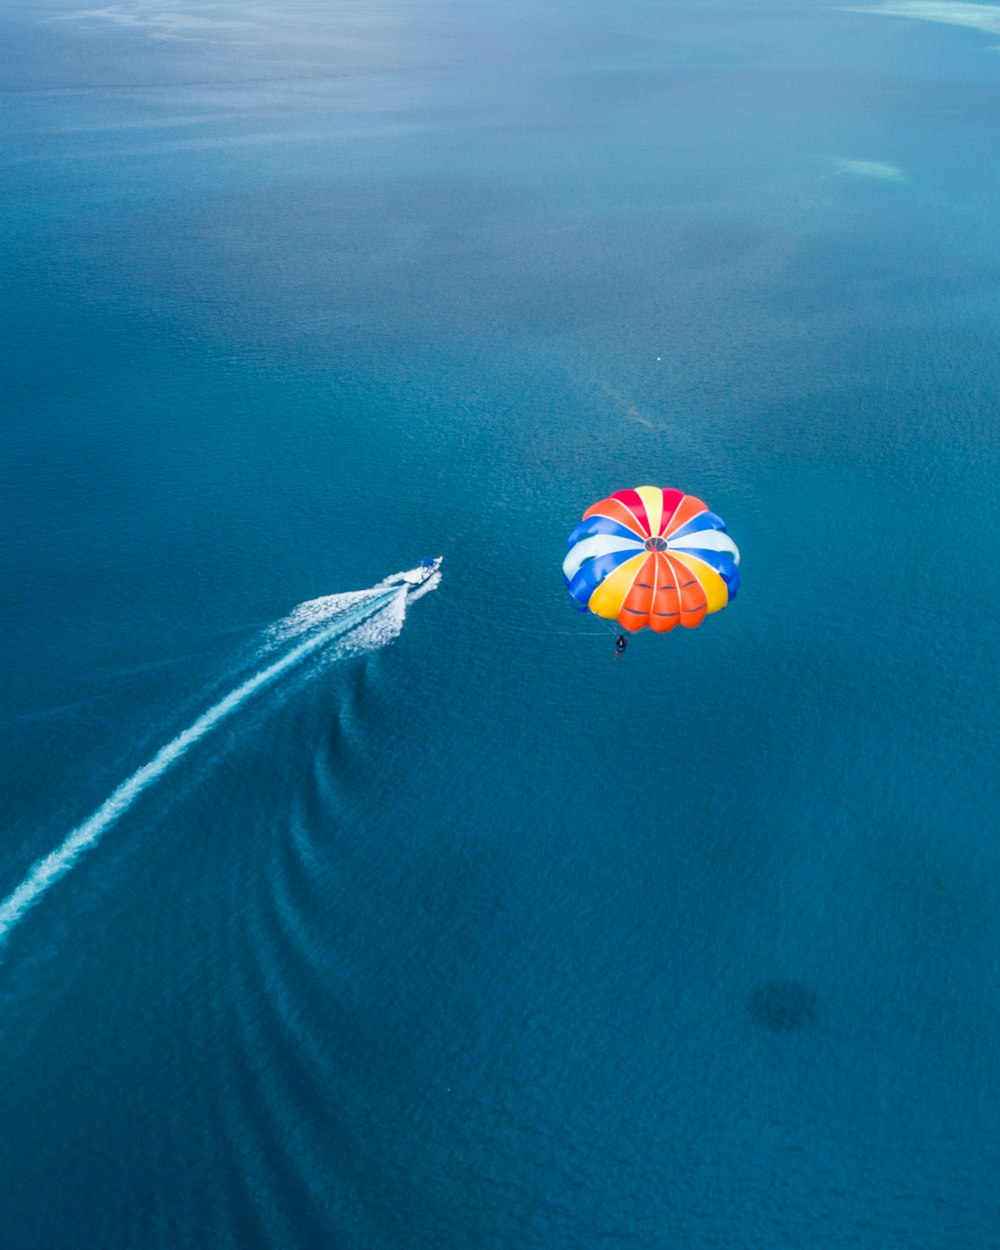 aerial photo of parachute above sea